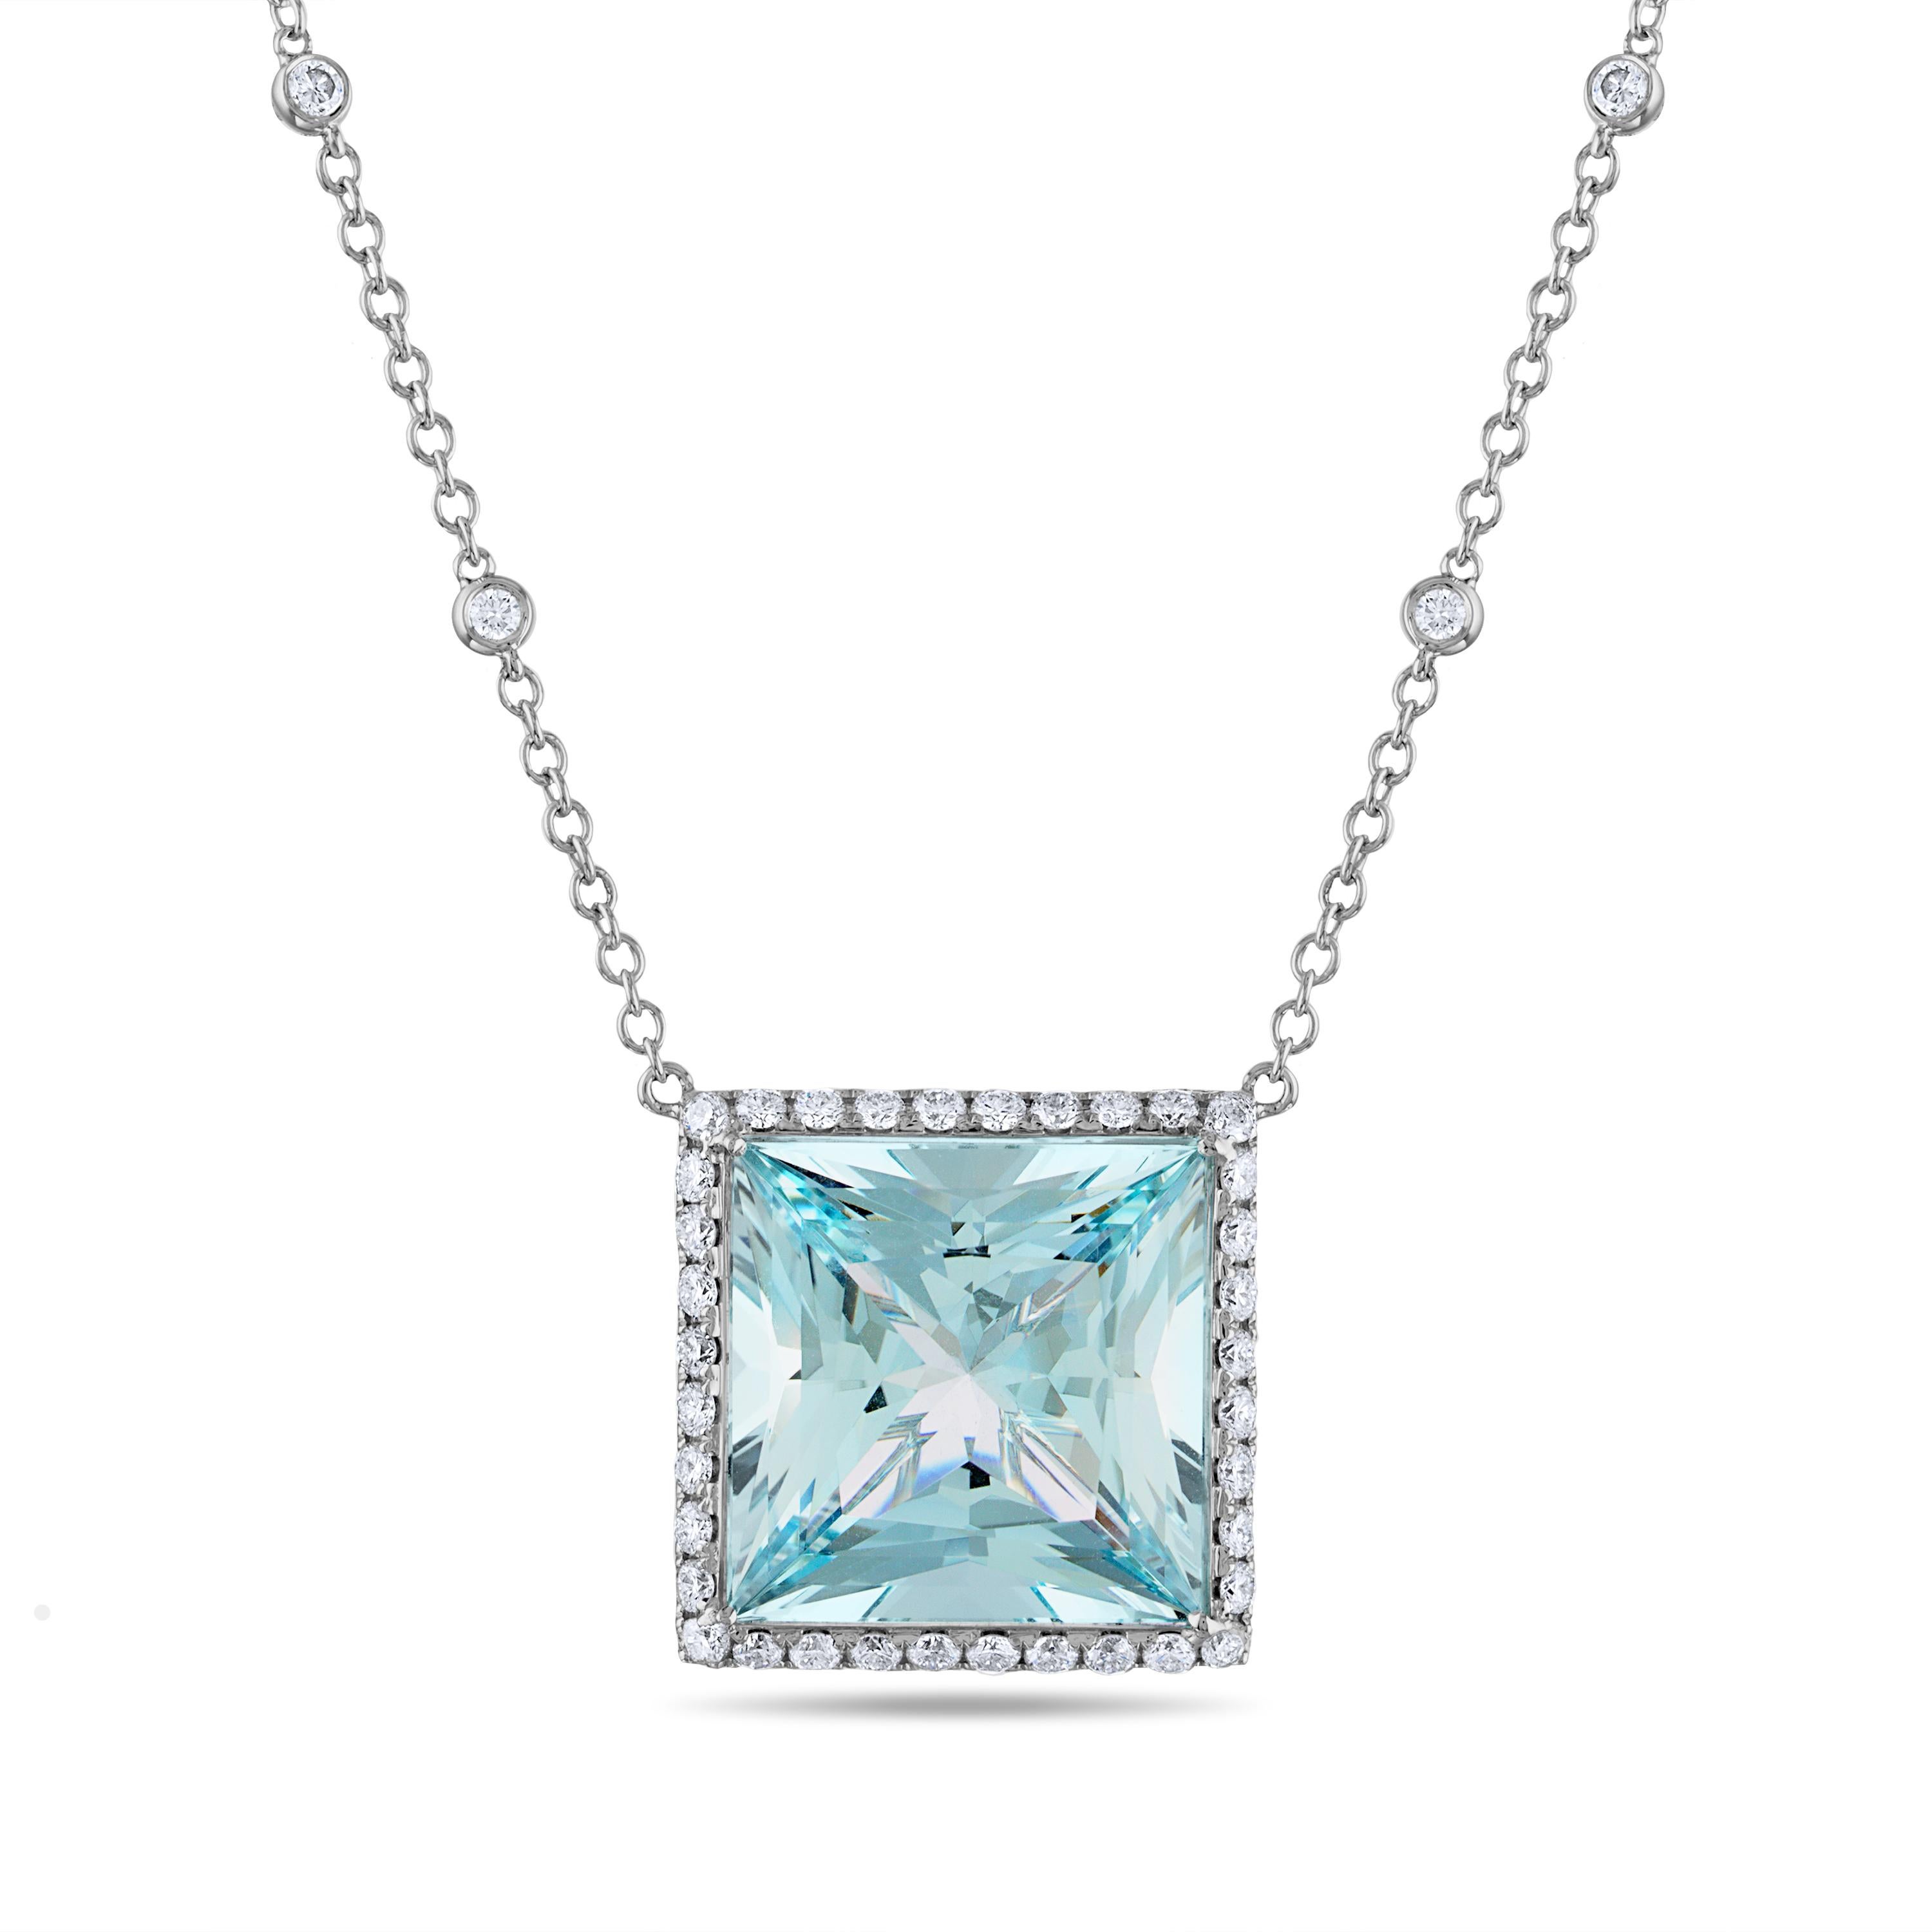 23.36 Carat Natural Princess-Cut Aquamarine and White Diamond Pendant Necklace:

A beautiful pendant necklace, it features a princess-cut natural aquamarine weighing 23.36 carat surrounded by white round-brilliant cut diamonds, which are also